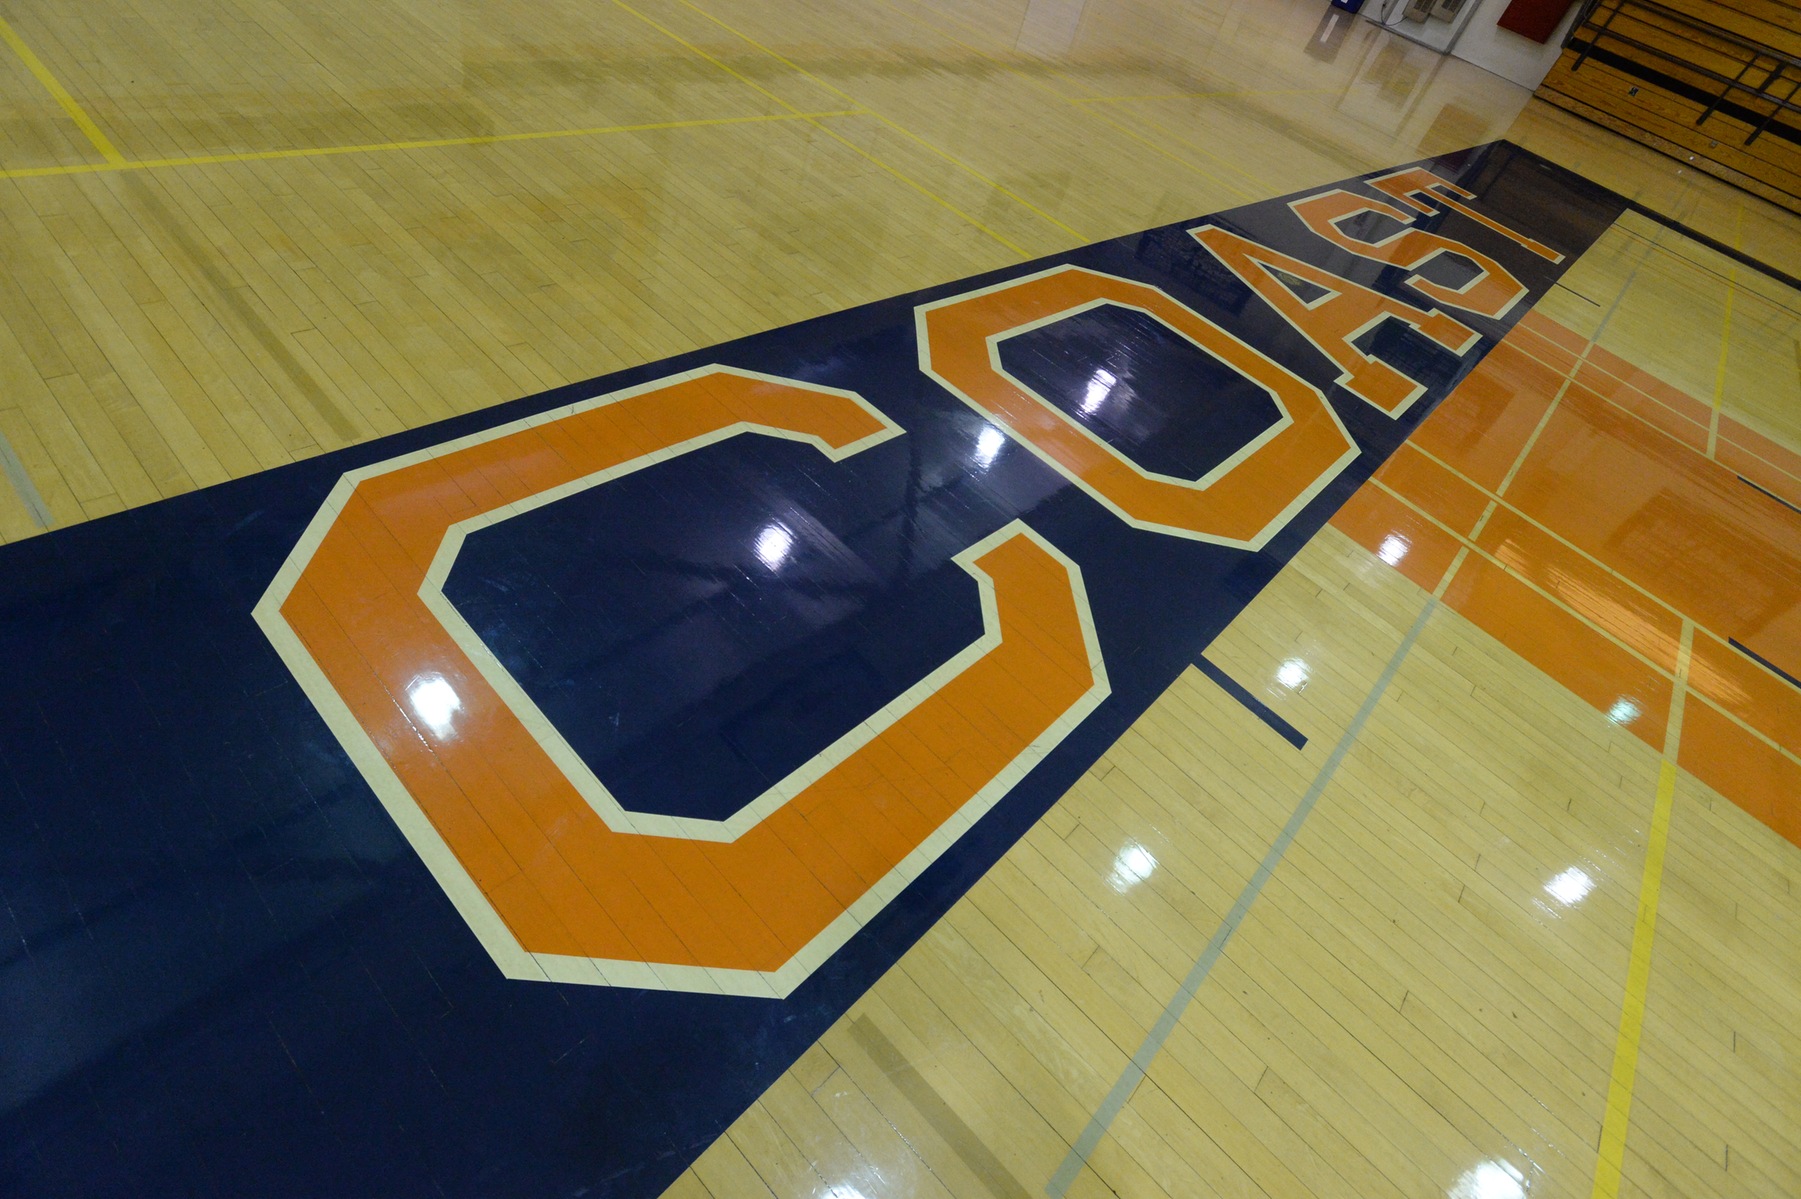 W-Basketball game cancelled for Friday; Men's game rescheduled for 5 p.m.